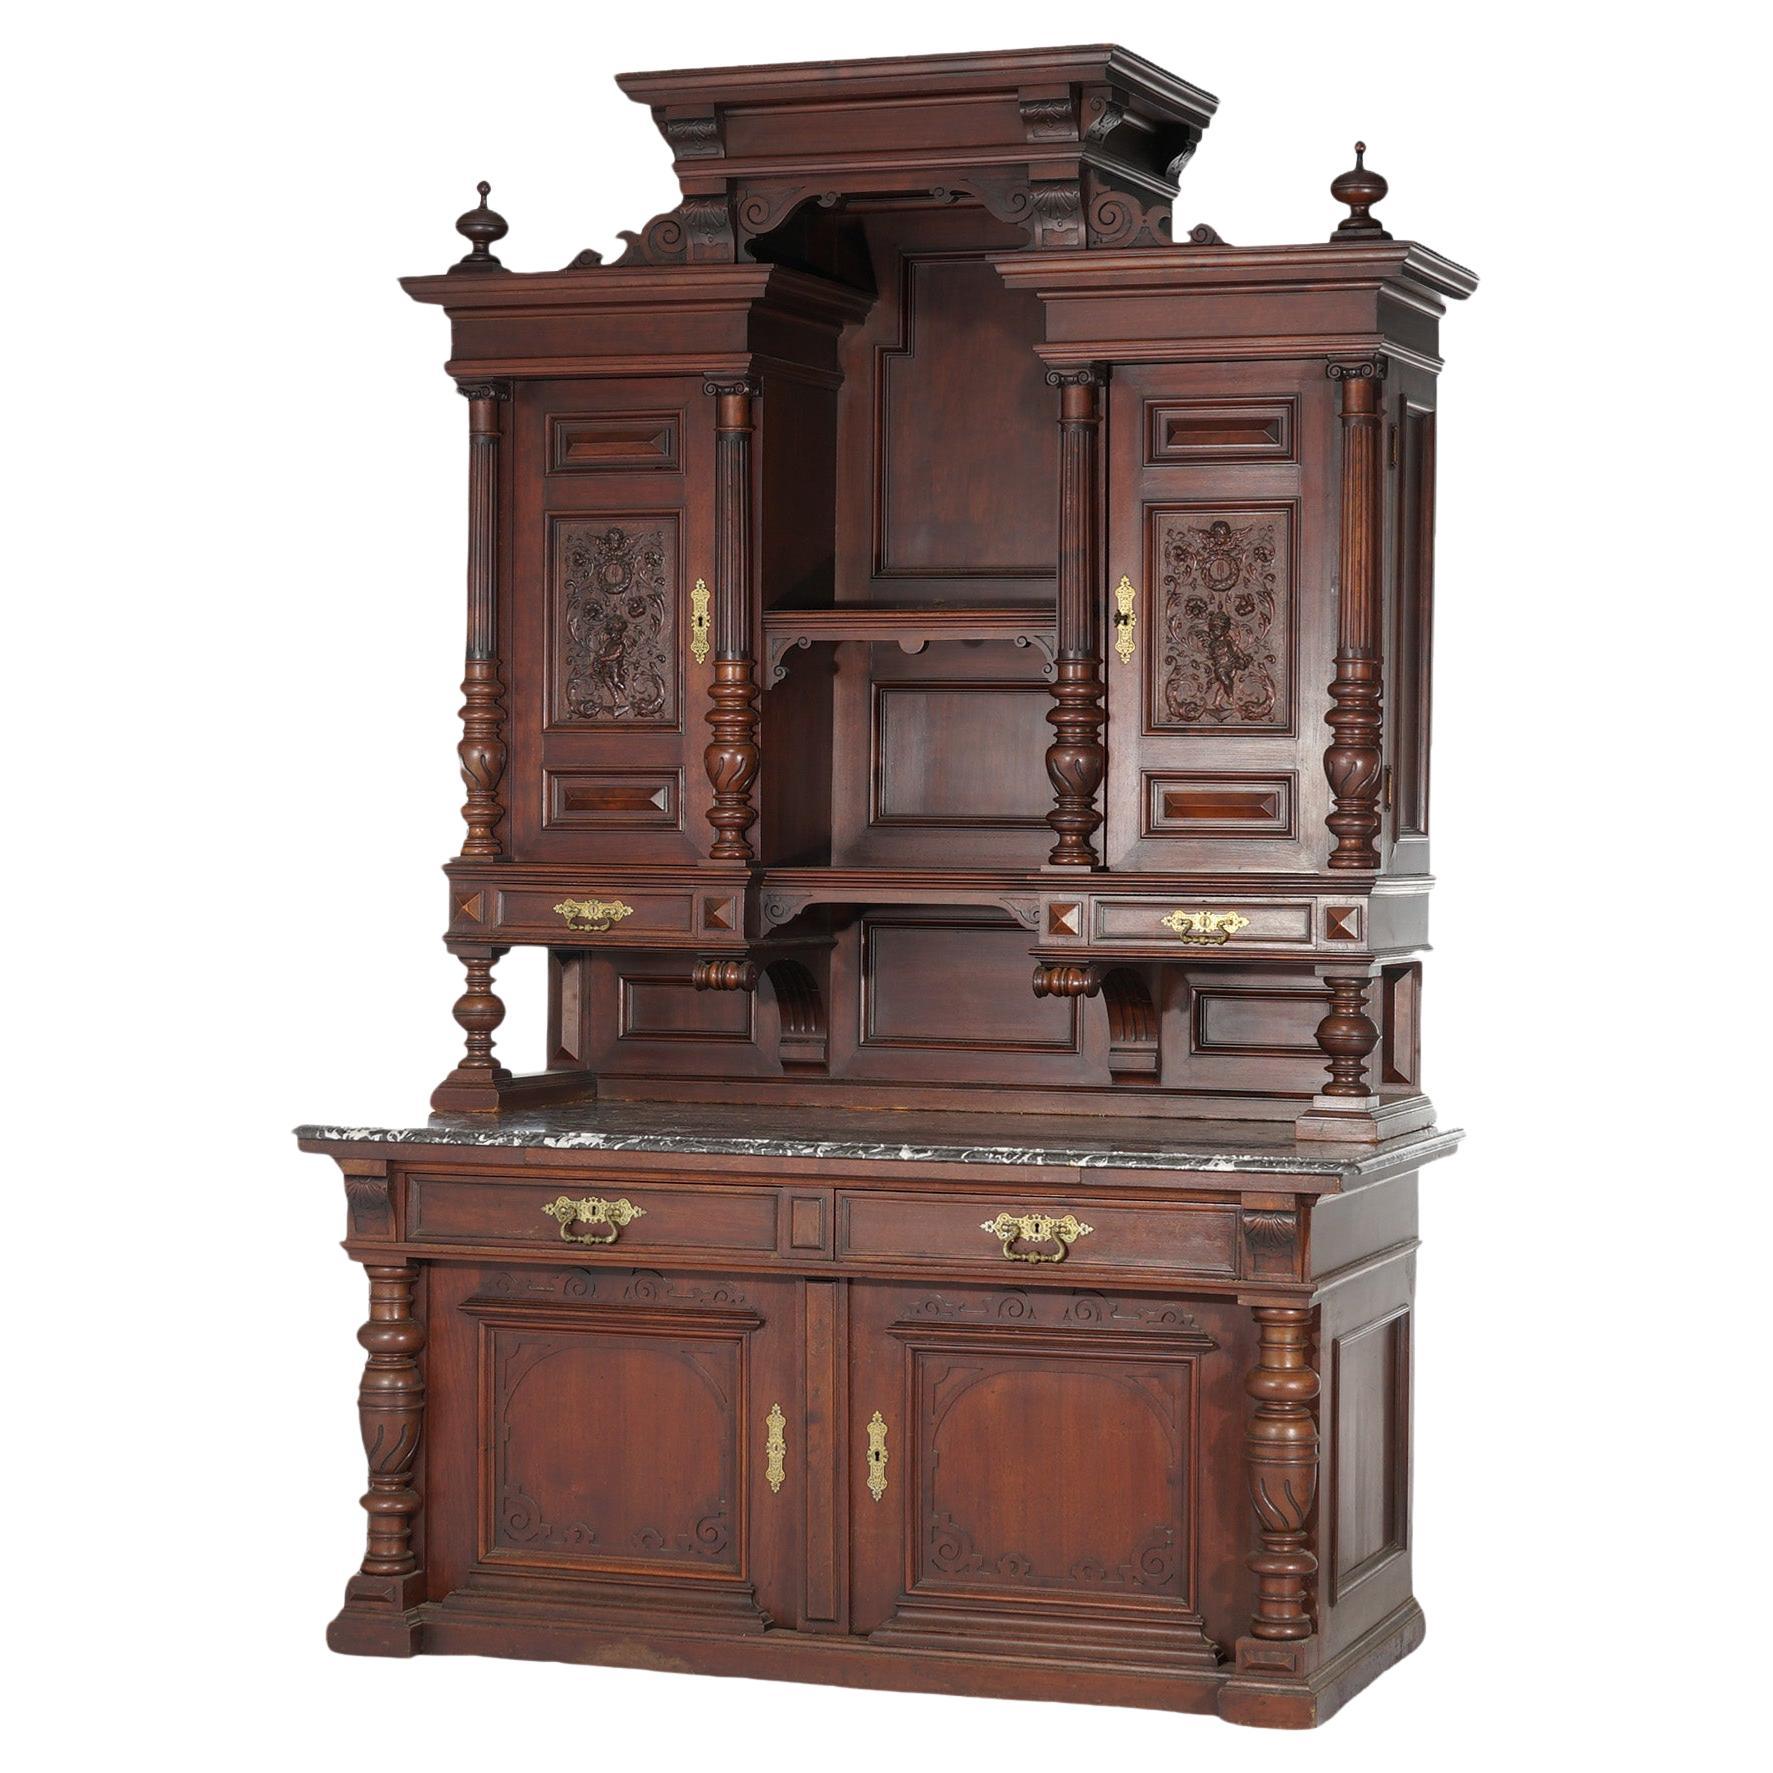 Antique French Renaissance Revival Carved Walnut Marble Top Court Cupboard C1890 For Sale